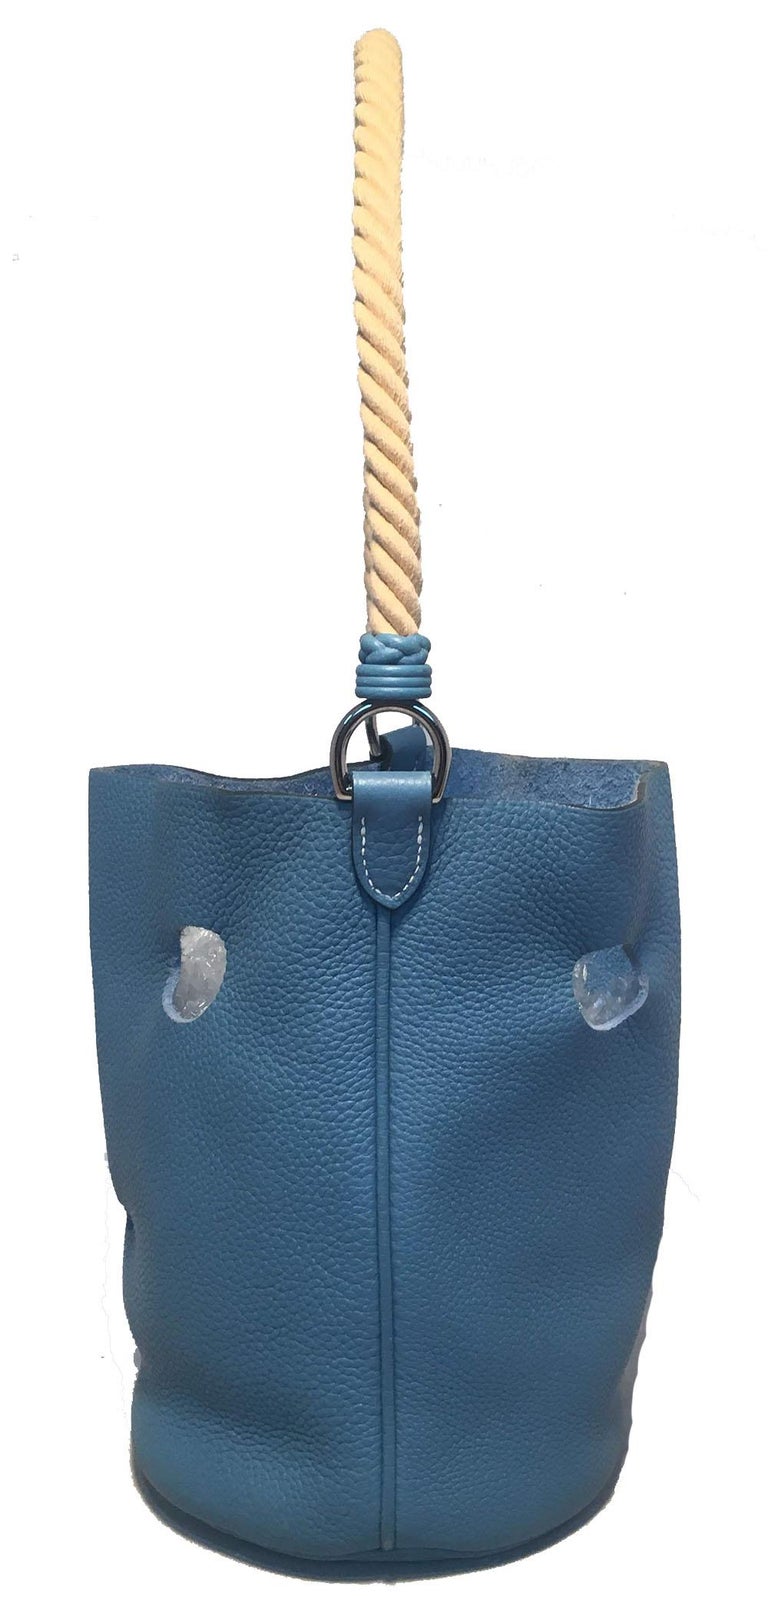 Hermes Mangeoire Blue Jean Taurillon Clemence Leather Rope Handle Bucket Bag In Excellent Condition For Sale In Philadelphia, PA